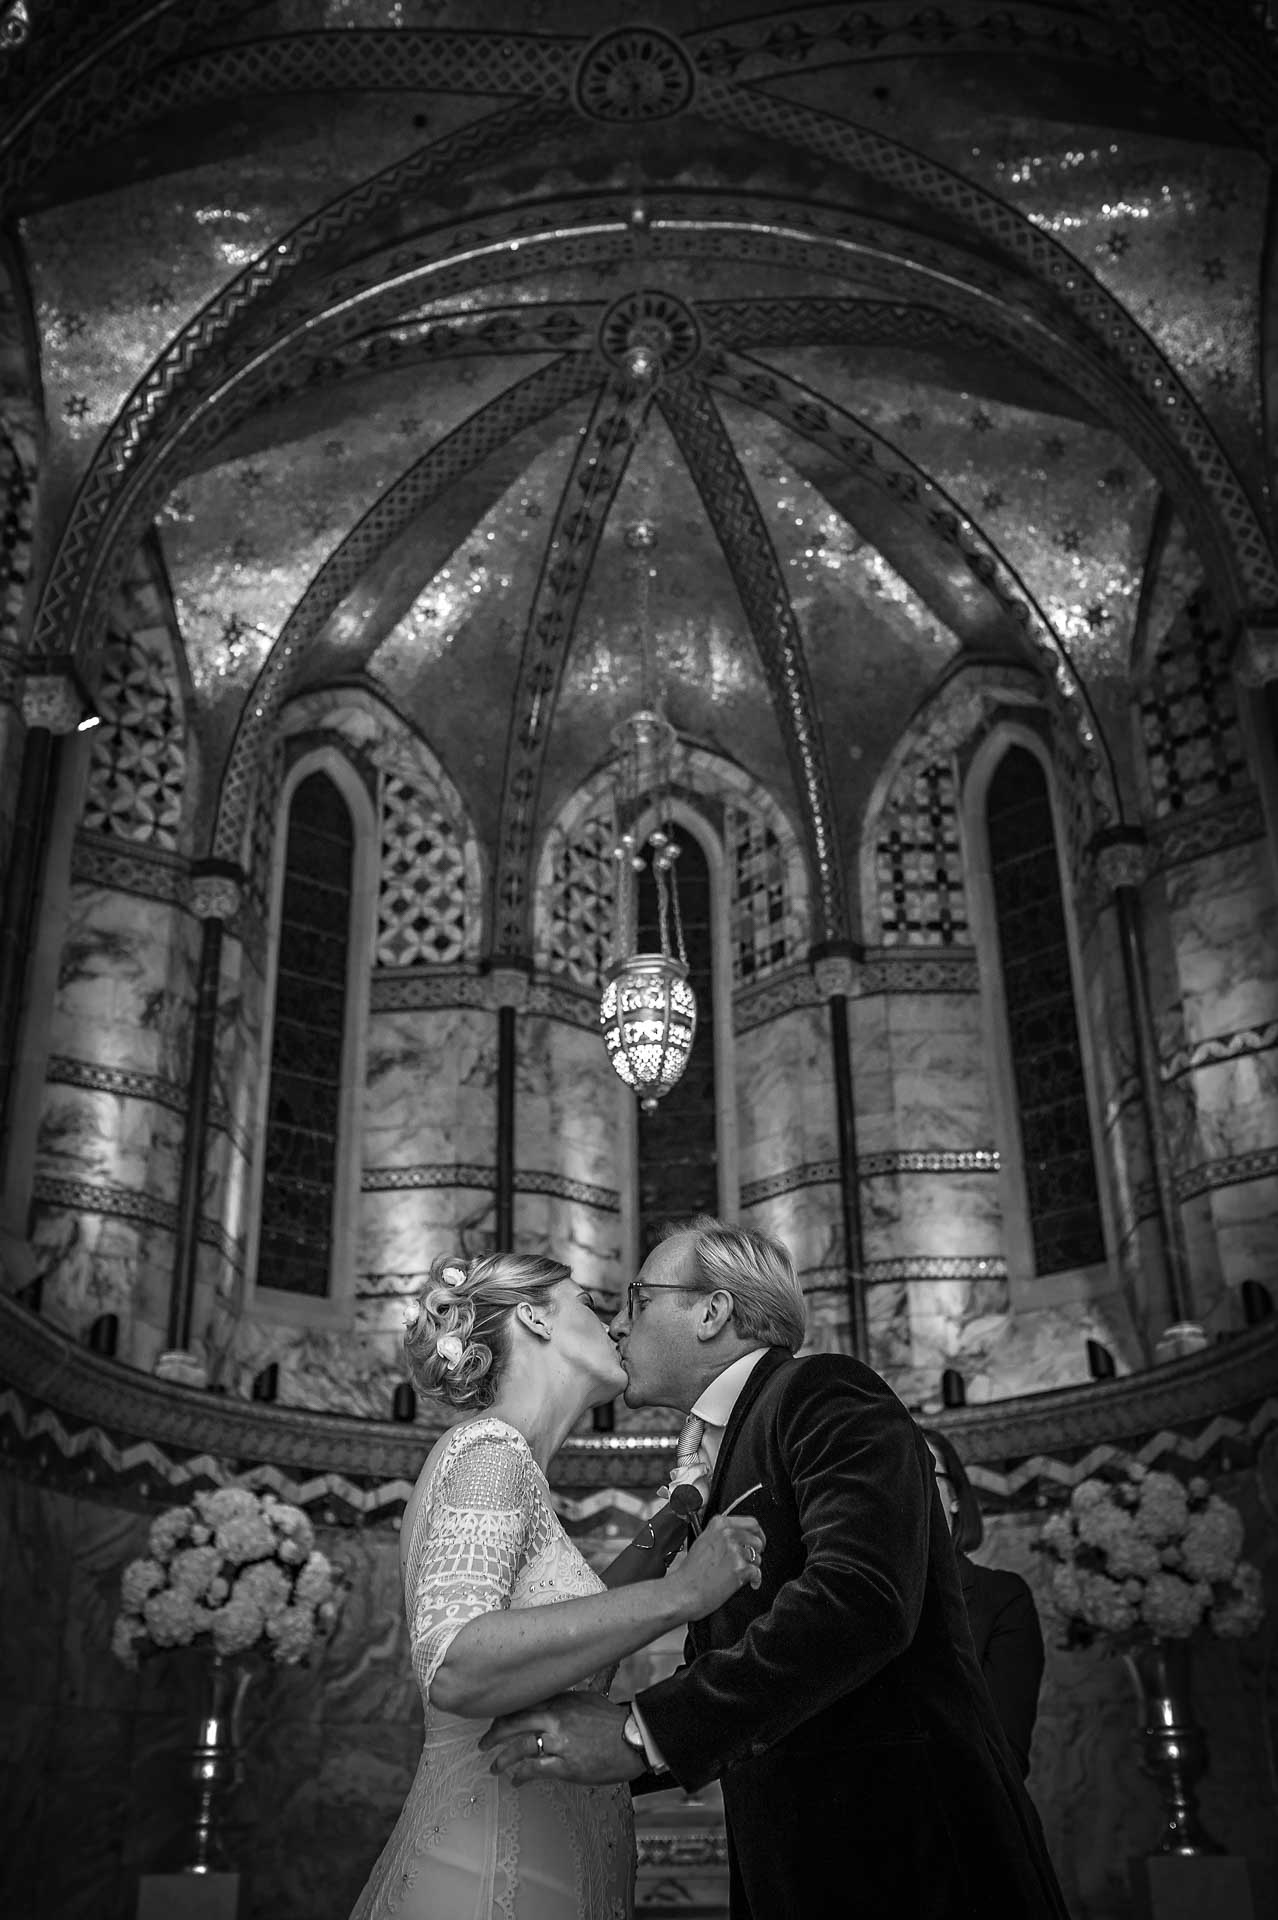 First Kiss at Wedding Showing the Ornate Ceiling of the Fitzrovia Chapel in Balck and White